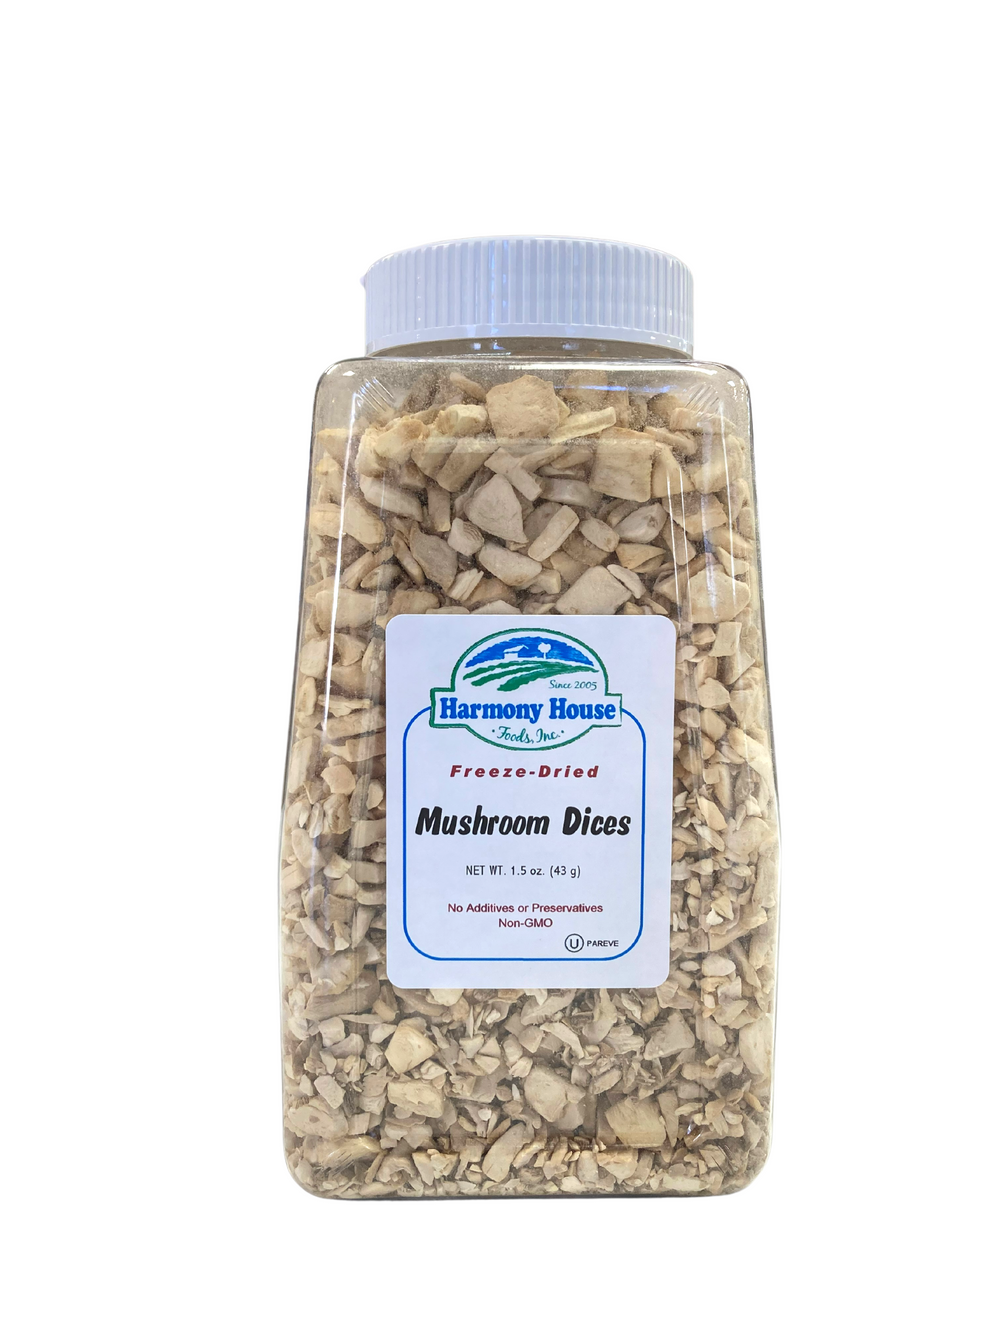 Mushroom Dices, Freeze Dried - Country Life Natural Foods